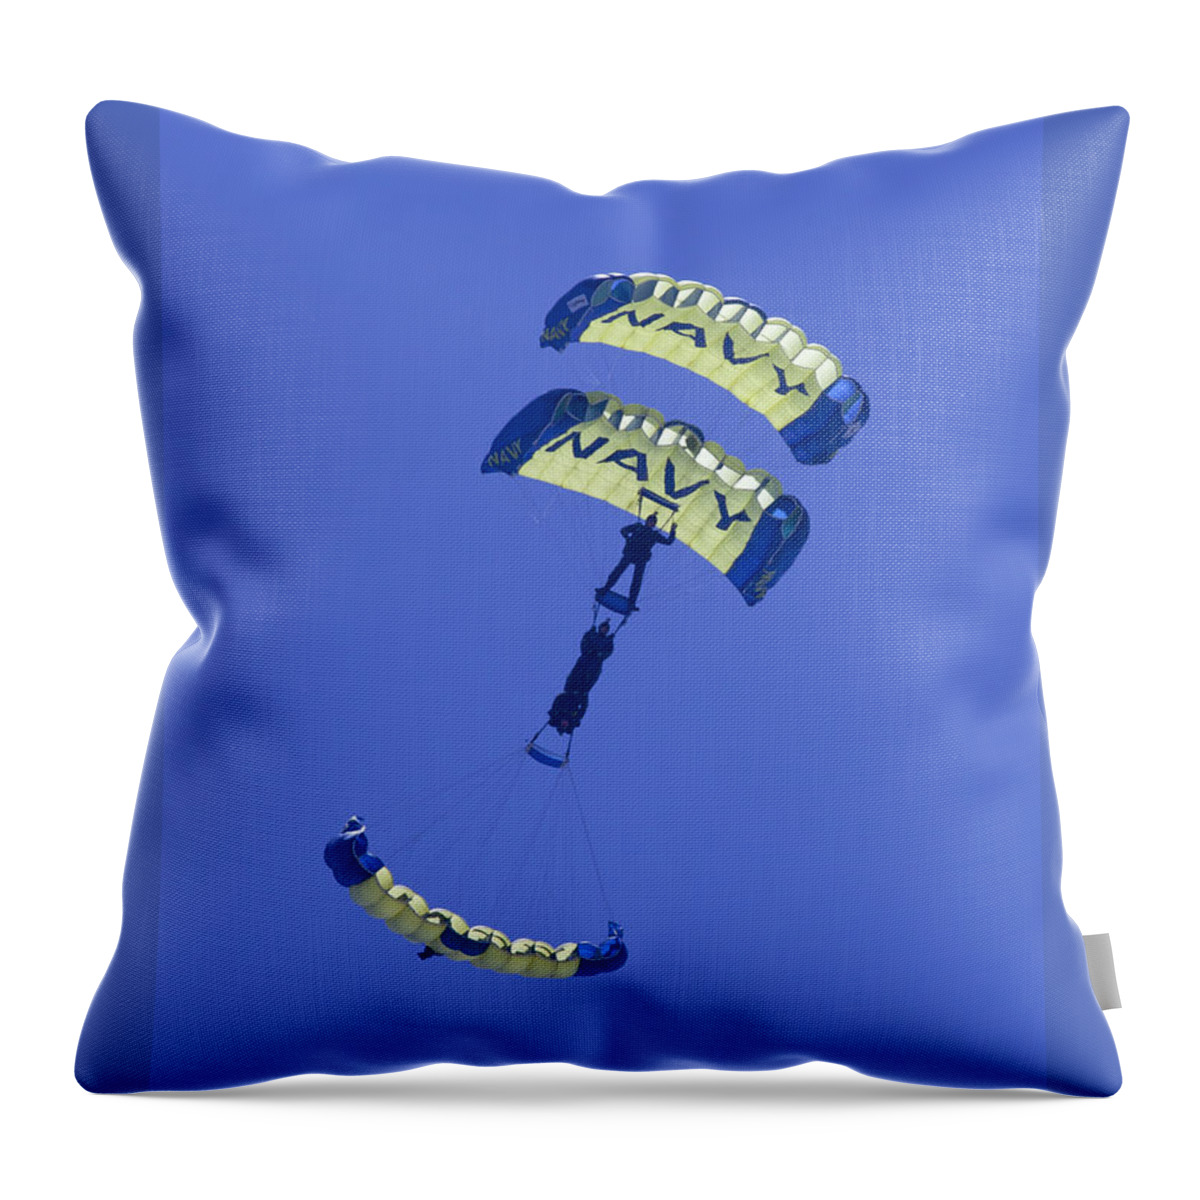 Oc Air Show Throw Pillow featuring the photograph Navy Seals Leap Frogs One Upside Down by Donna Corless